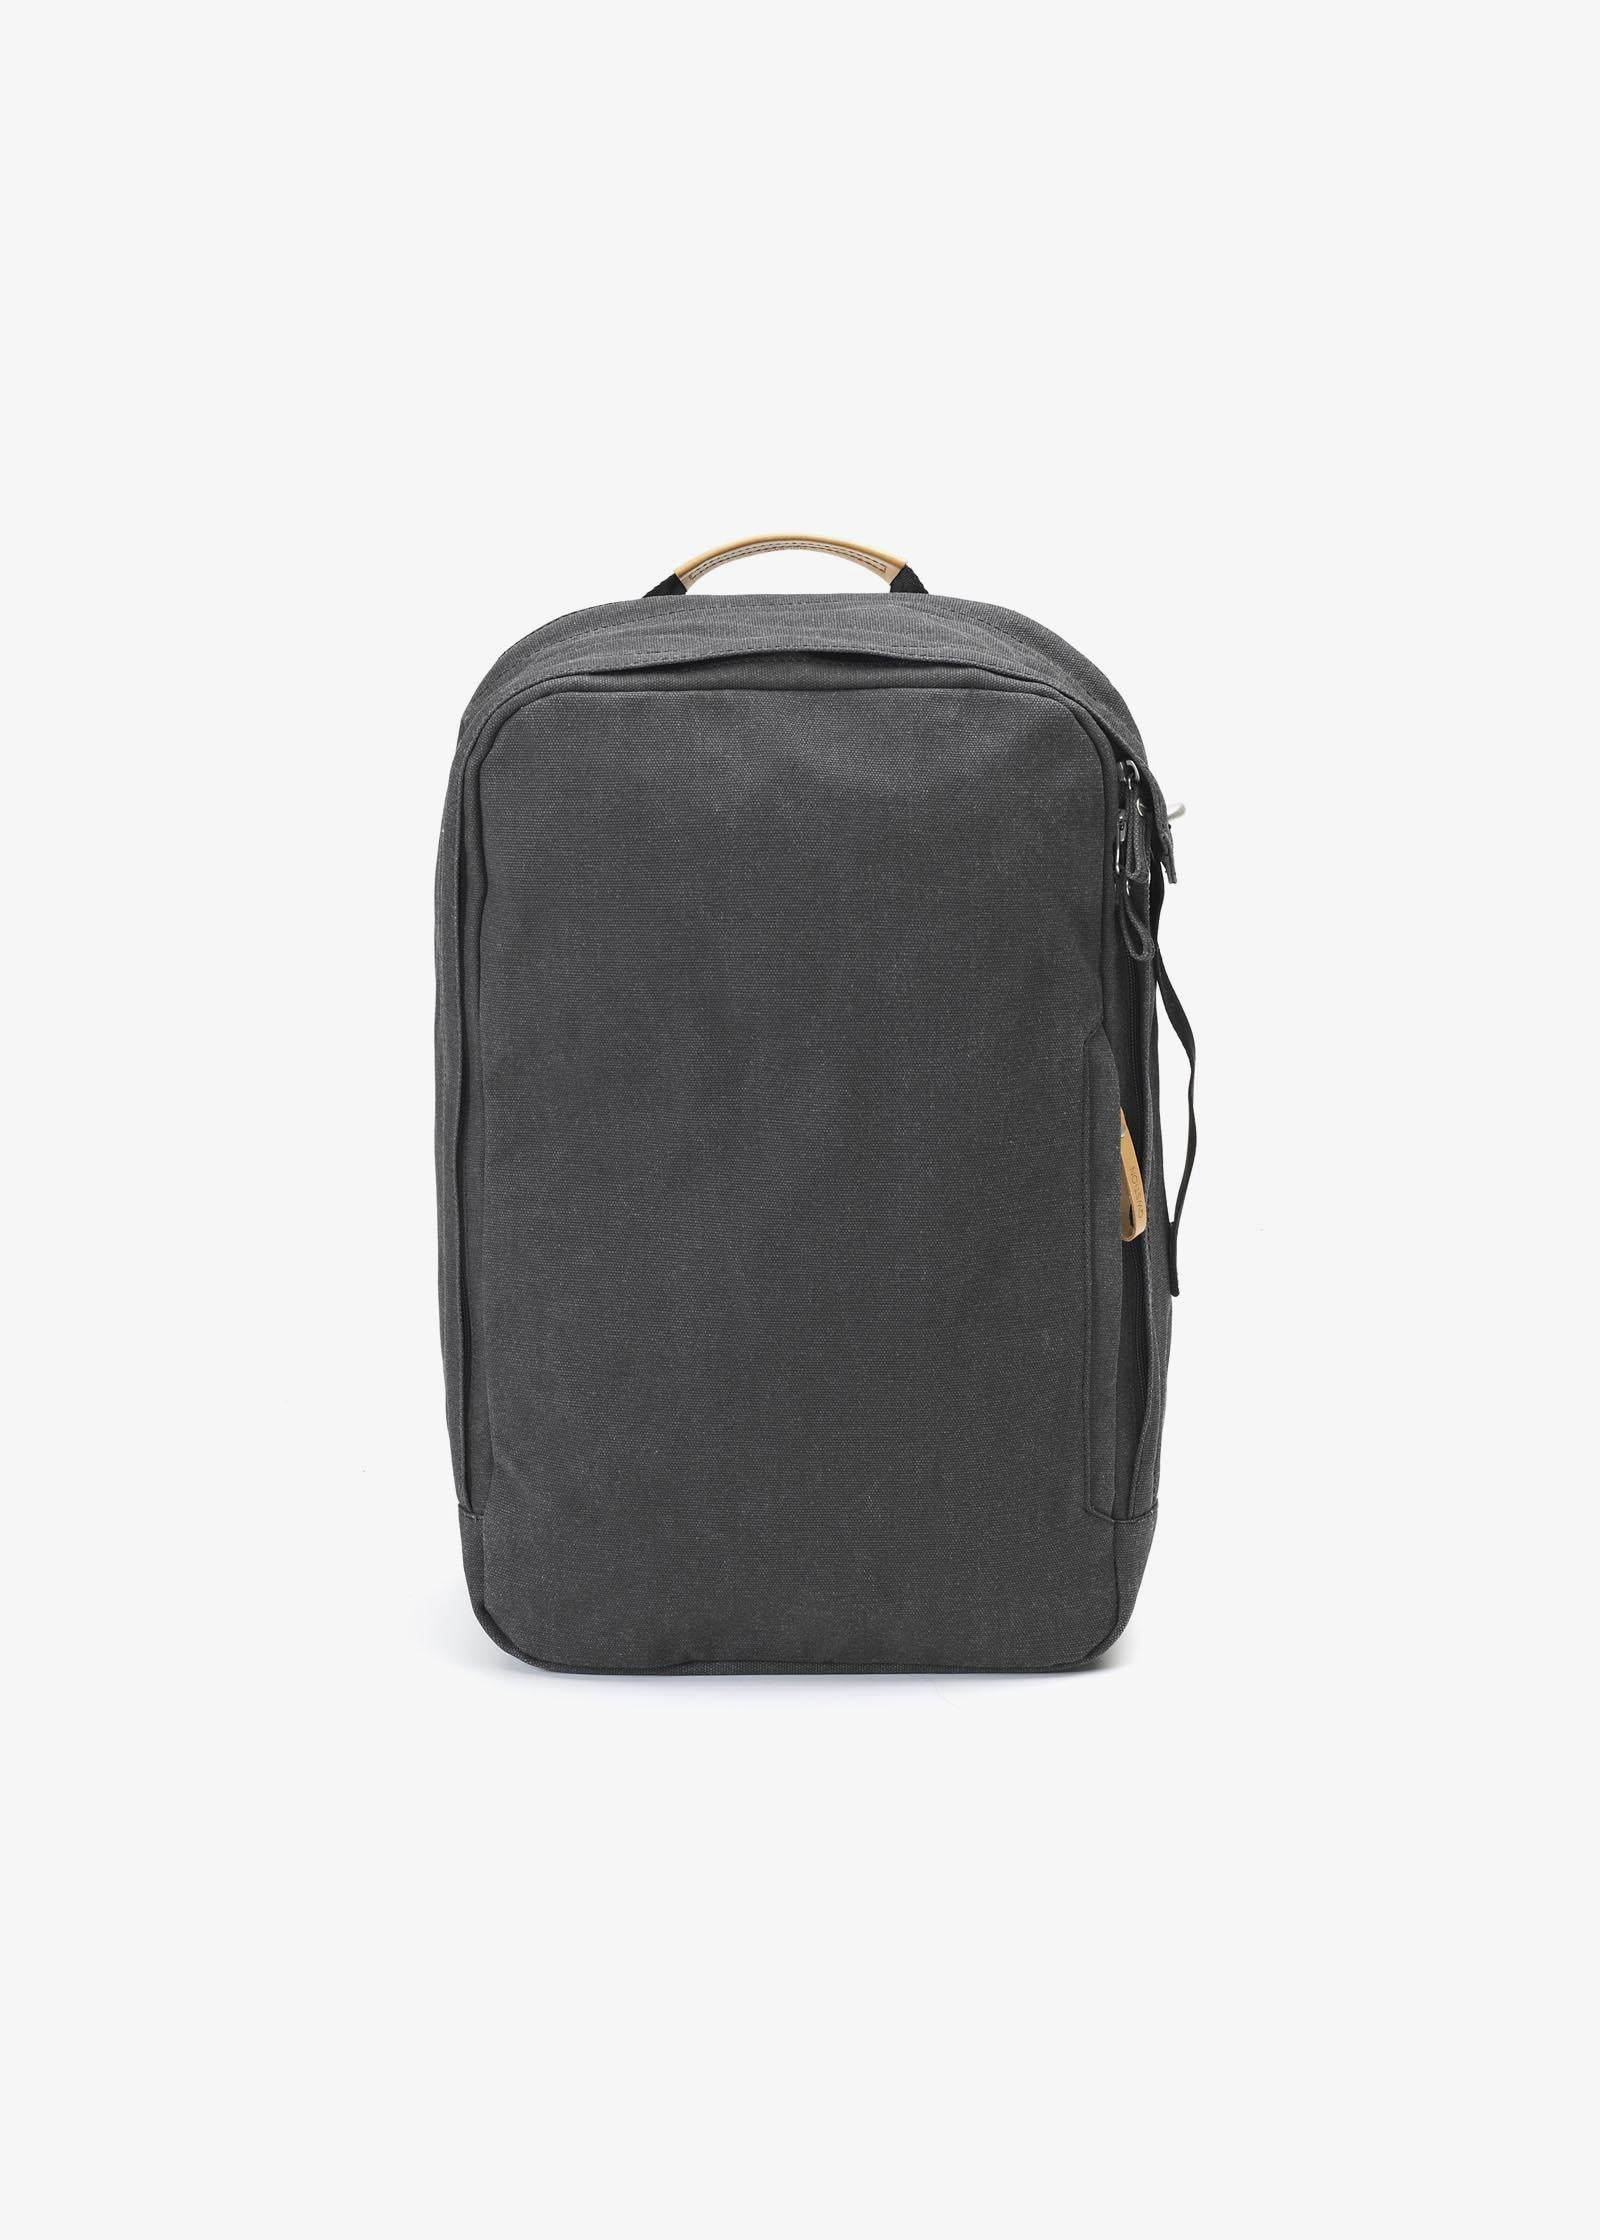 Backpack – Organic Washed Black - QWSTION